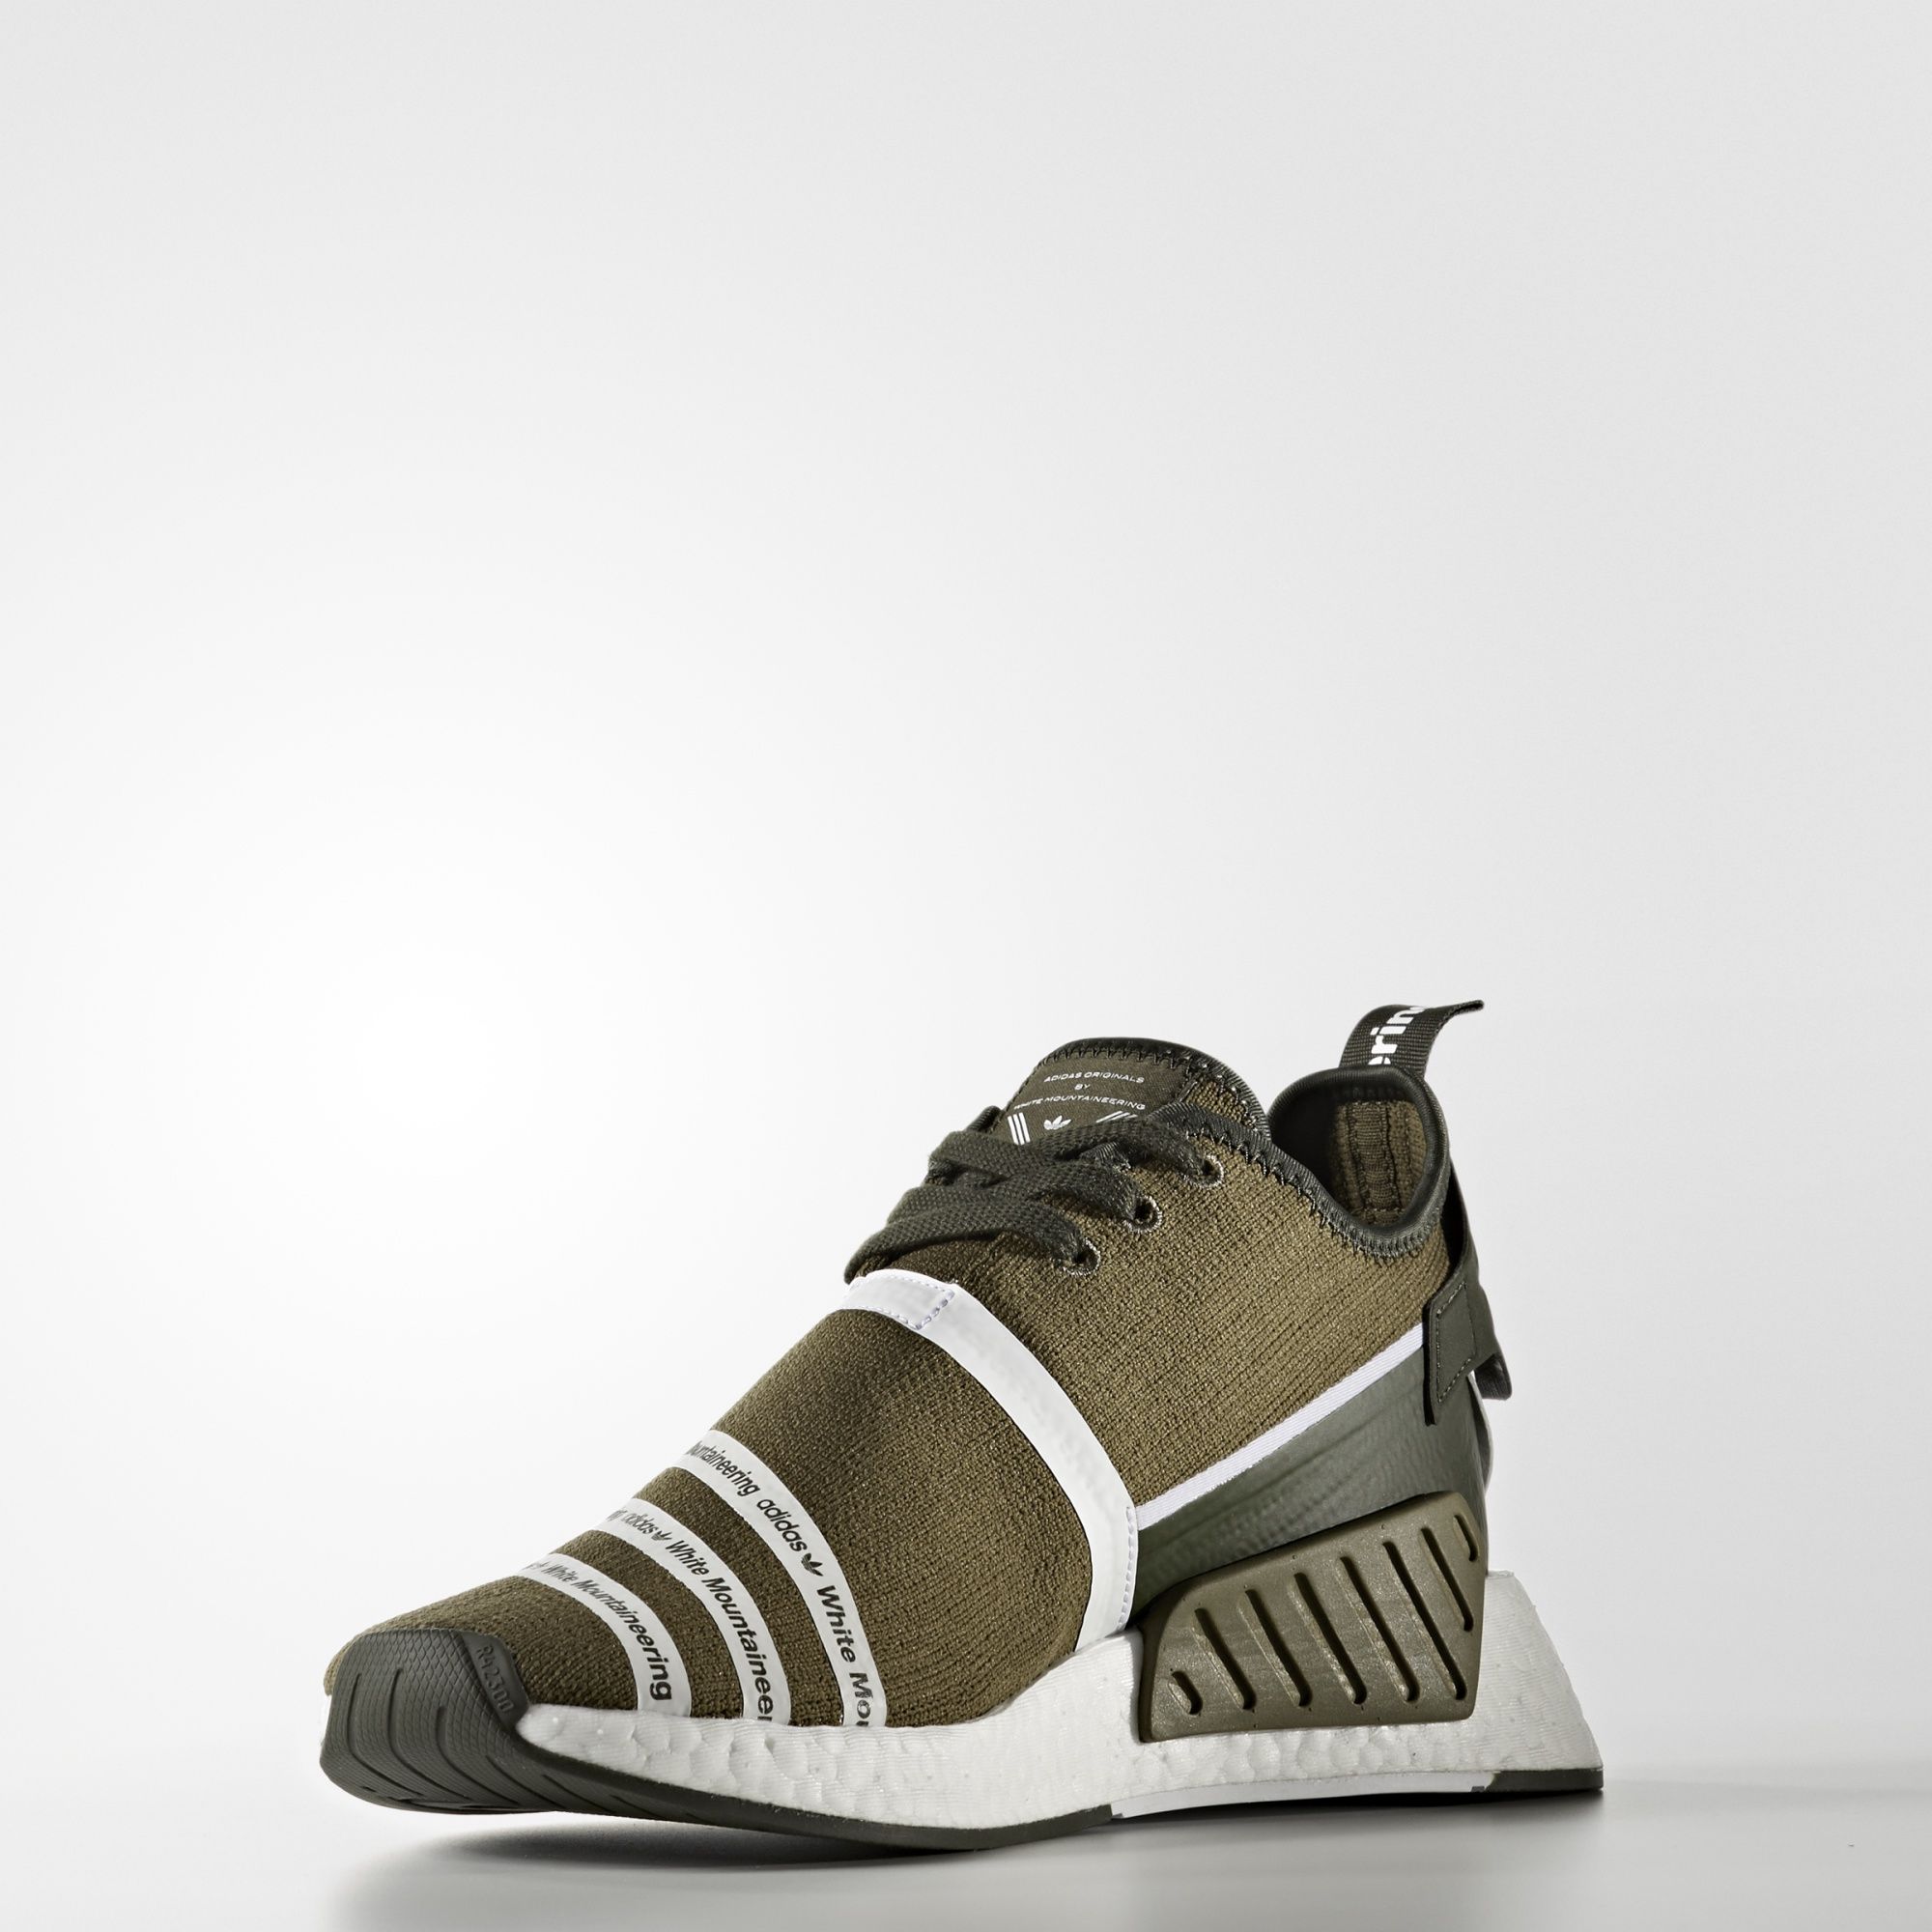 adidas-nmd_r2-pk-x-white-mountaineering-trace-olive-3